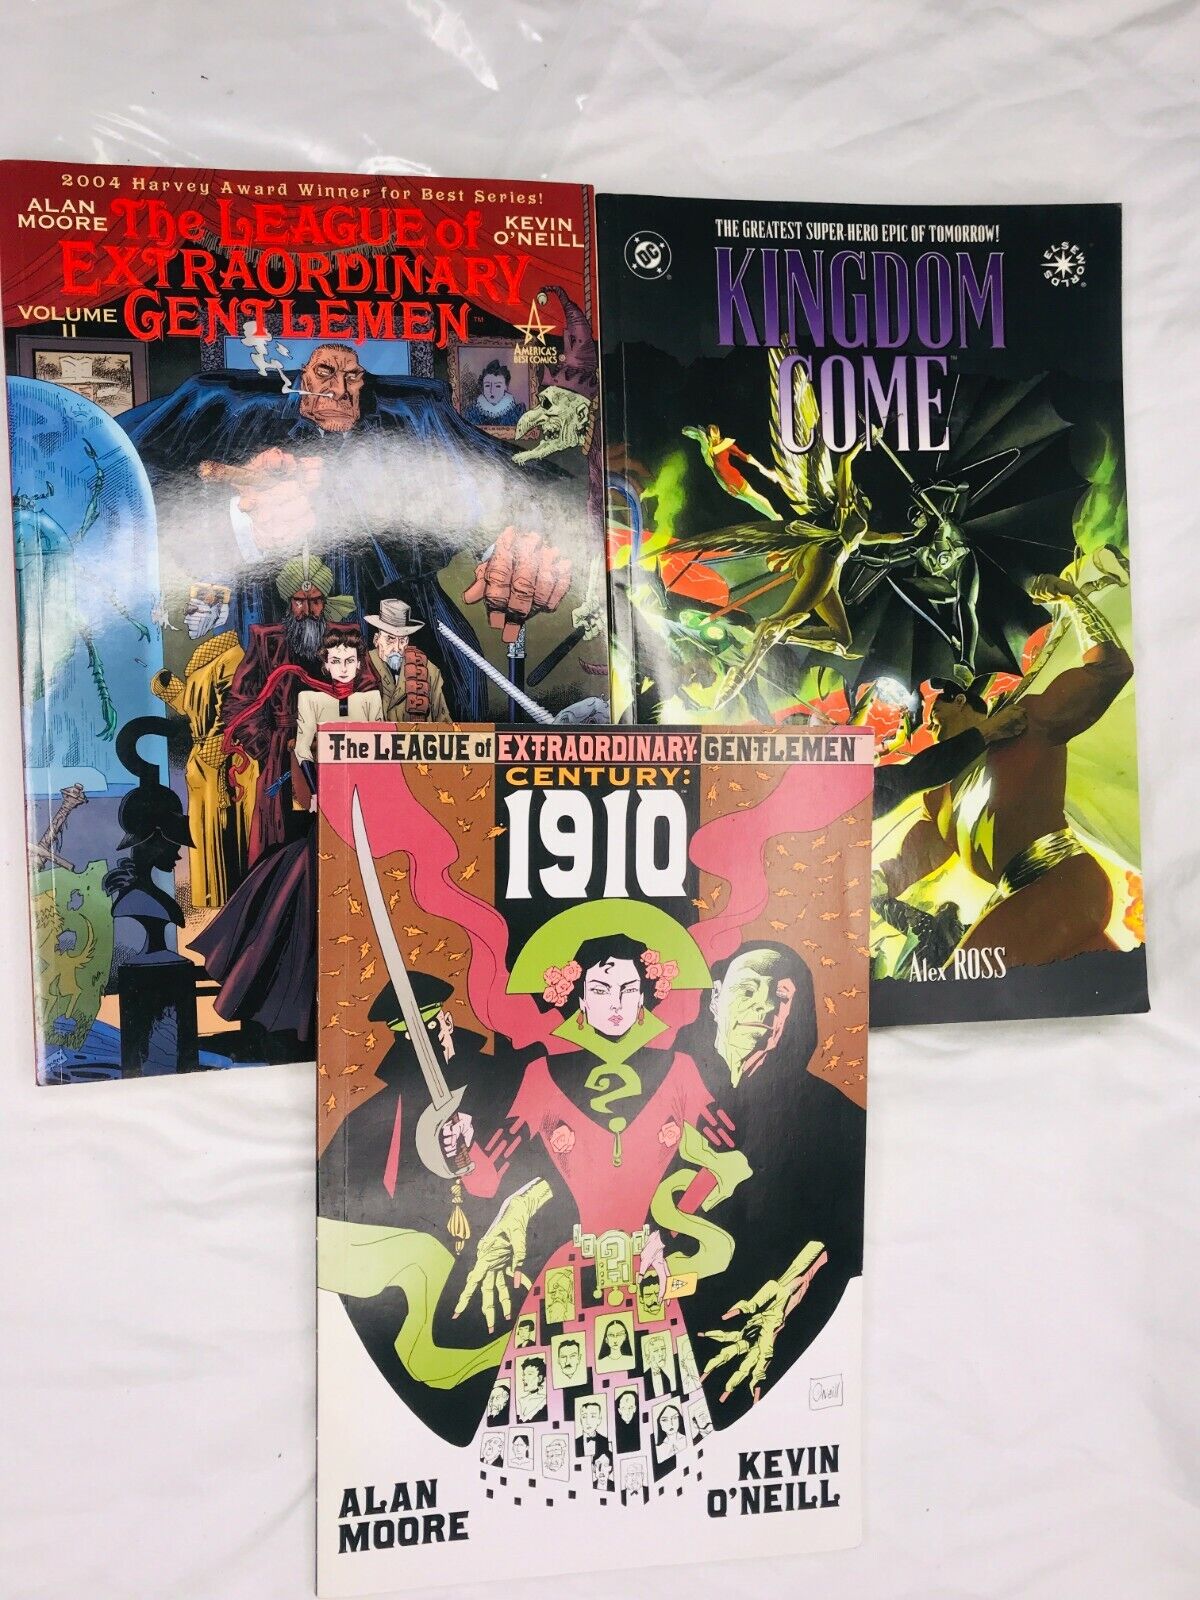 Lot of 3 Graphic Novels The League of Extraordinary Gentlemen & Kingdom Come